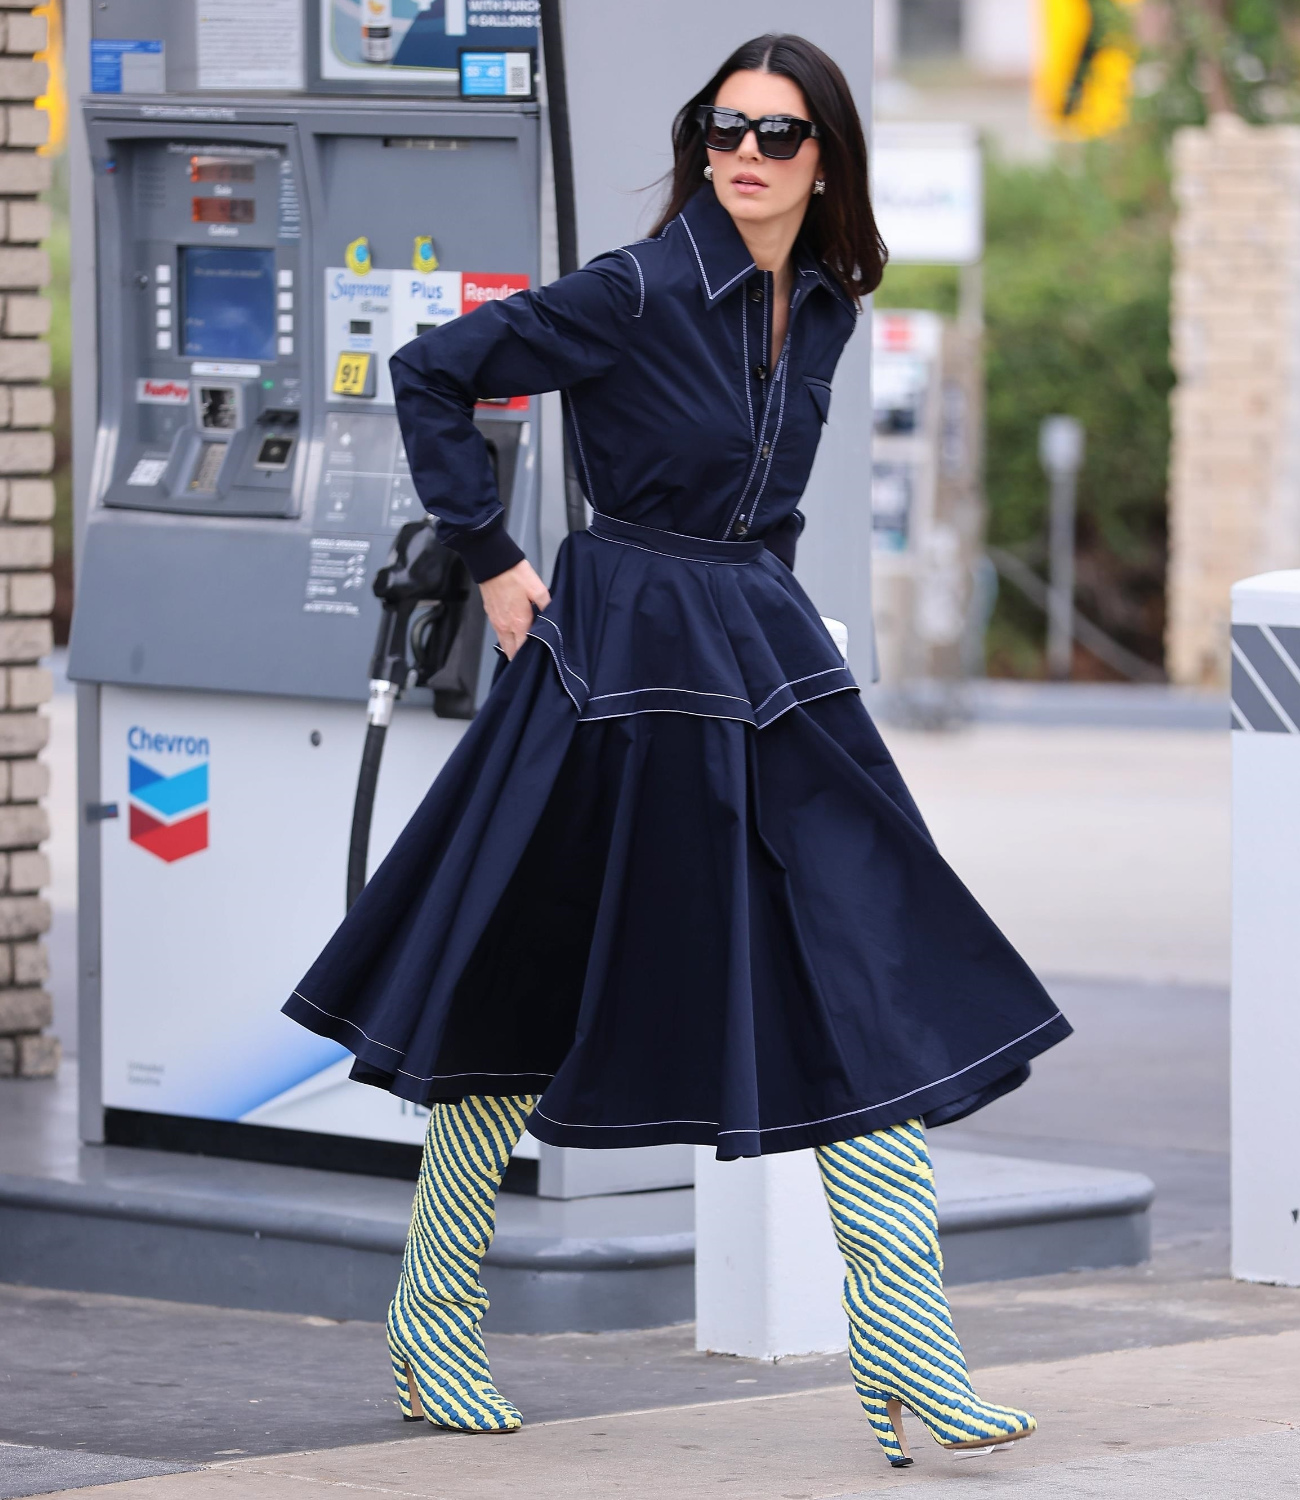 Kendall Jenner wearing Bottega Veneta's new Over-The-Knee boots at the gas station.